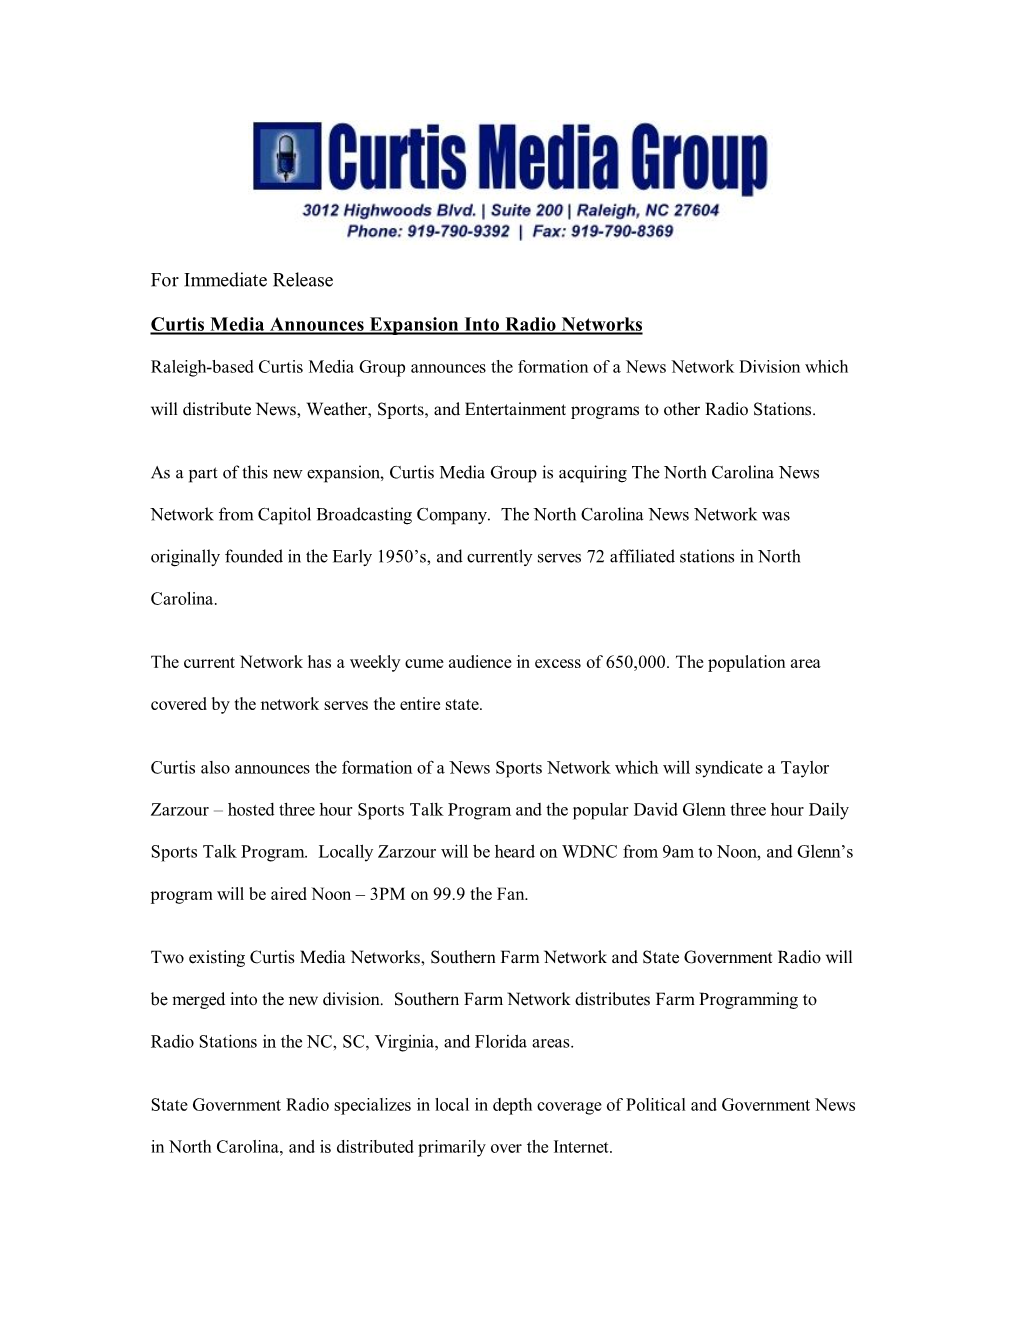 For Immediate Release Curtis Media Announces Expansion Into Radio Networks